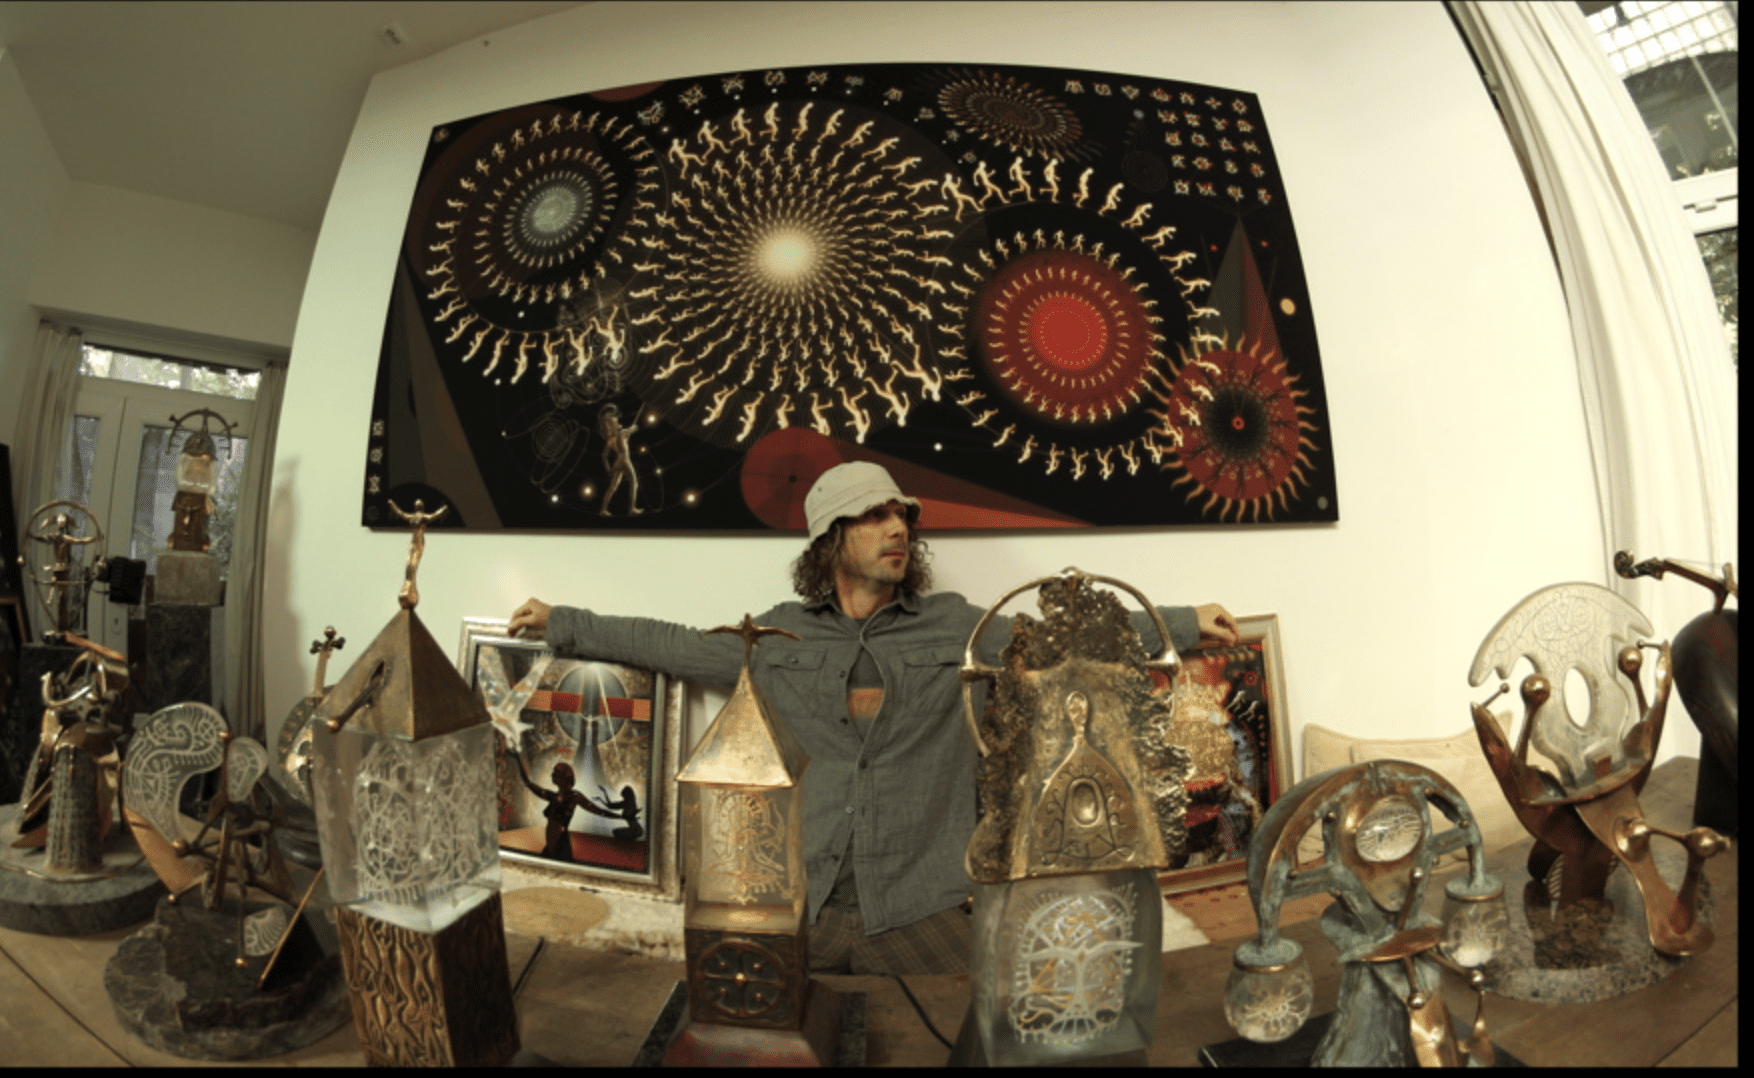 Man posing with art prints and sculptures